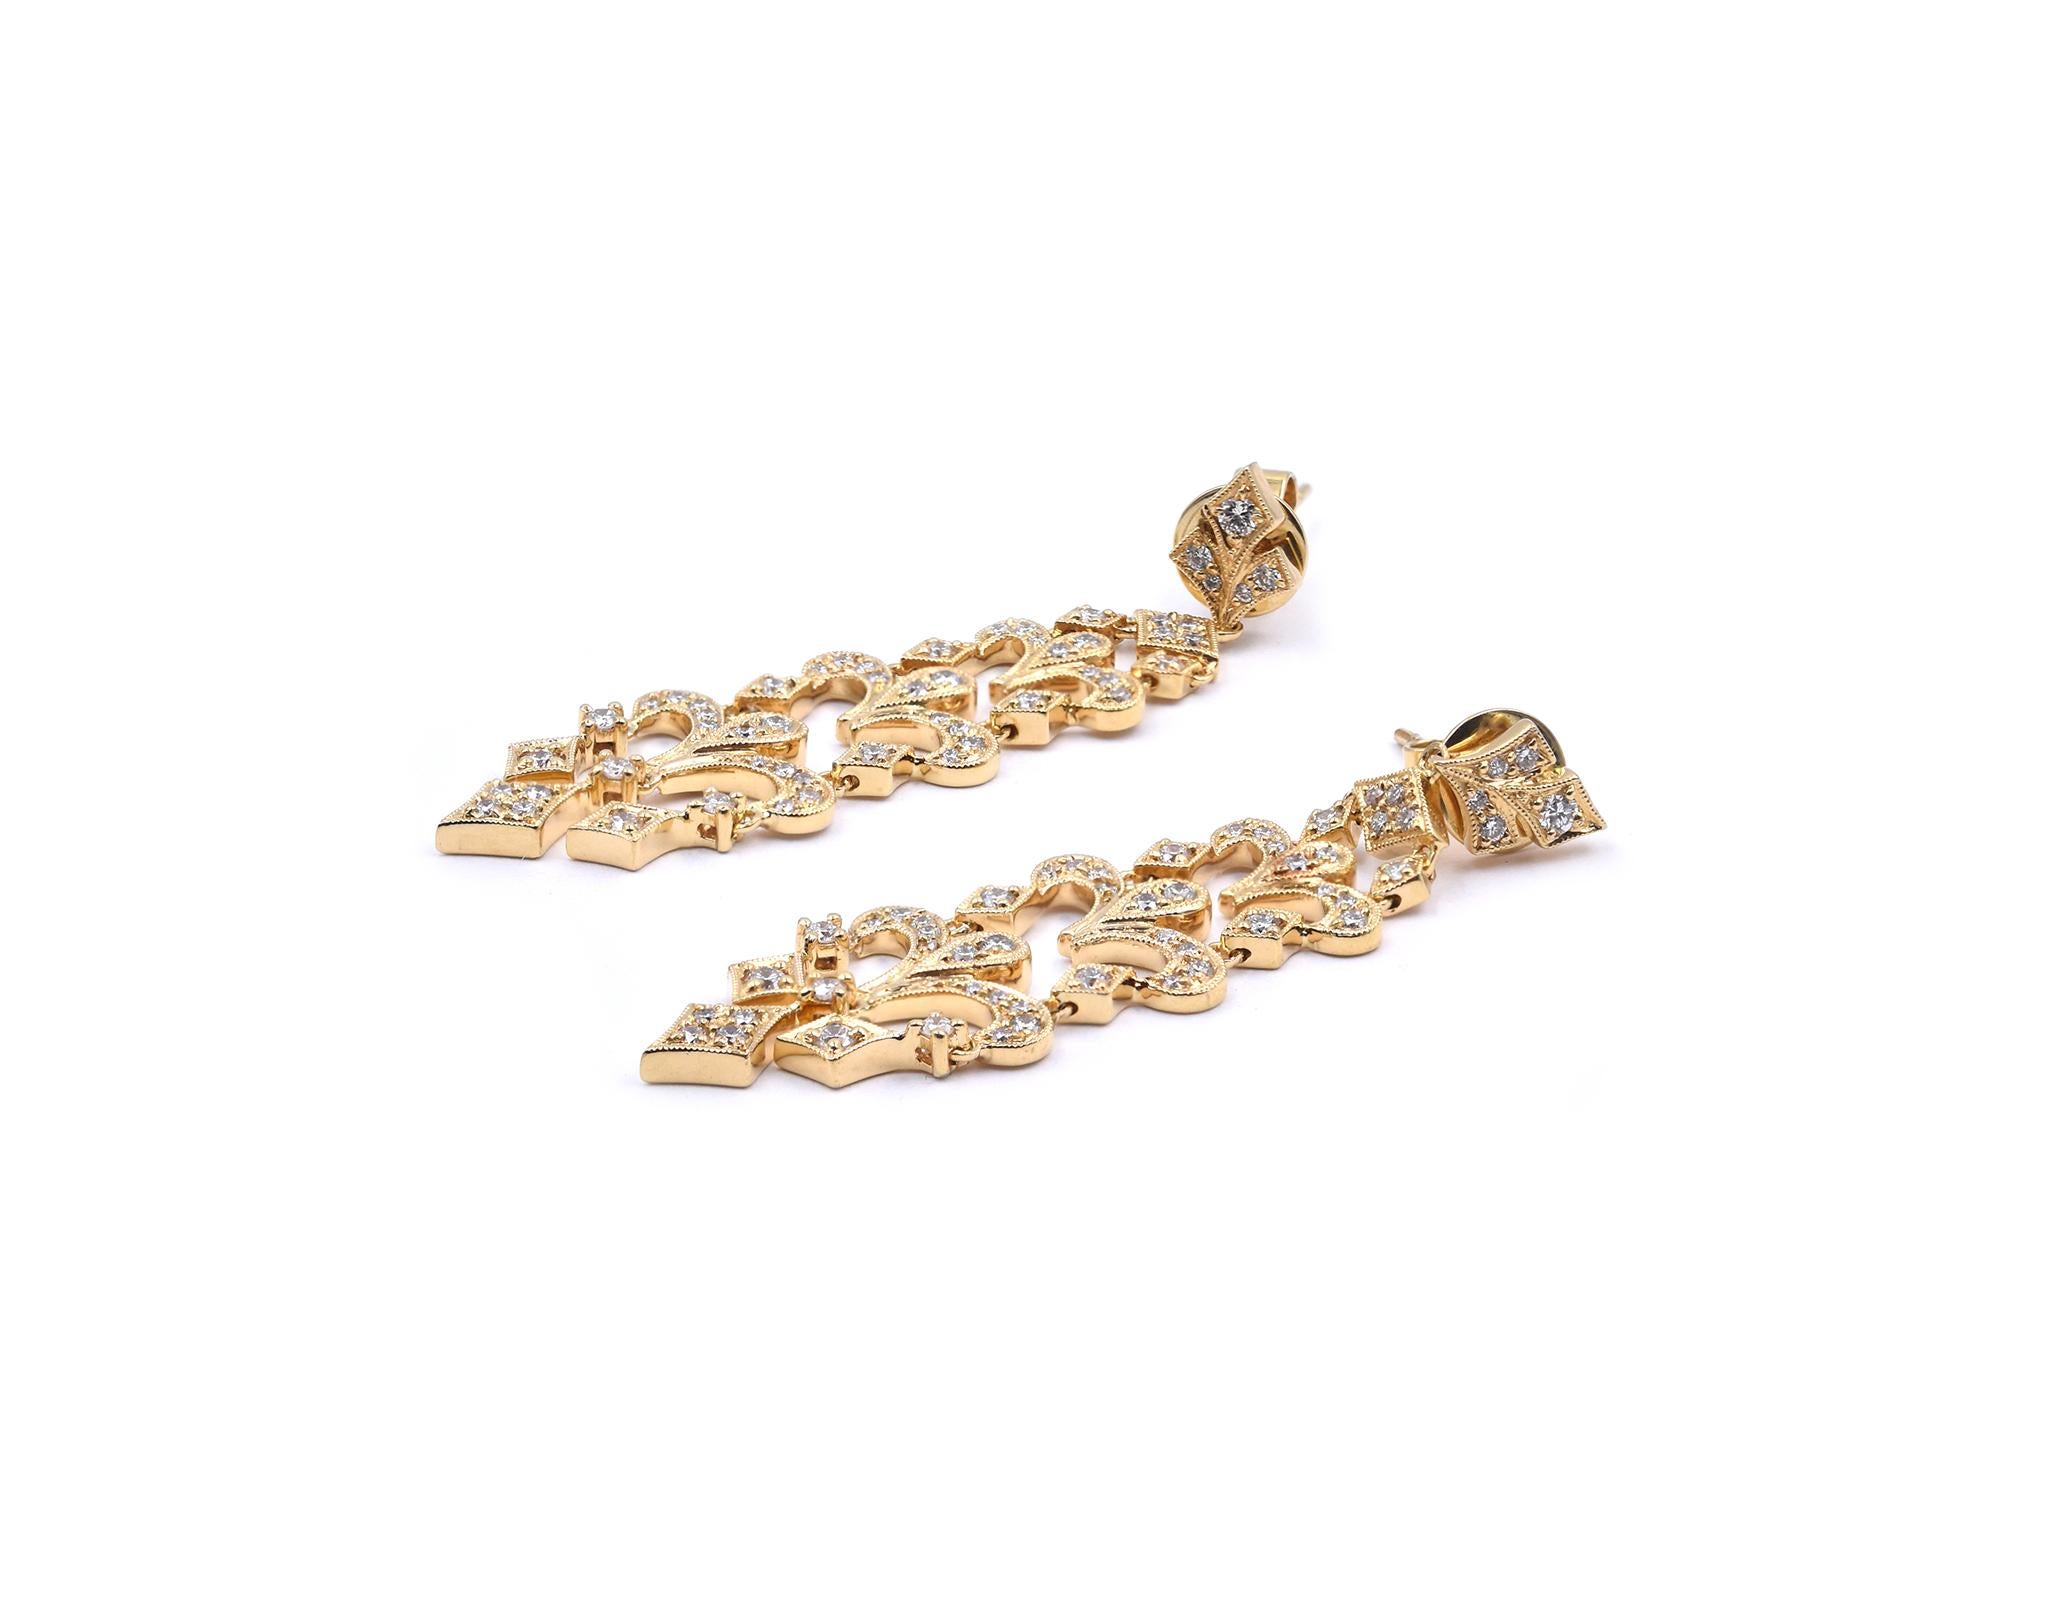 Material: 18K yellow gold
Diamonds: 108 round cut = 1.05cttw
Color:  G
Clarity: VS
Dimensions: earrings measure 49.5 X 14.4mm
Weight: 10.36 grams
